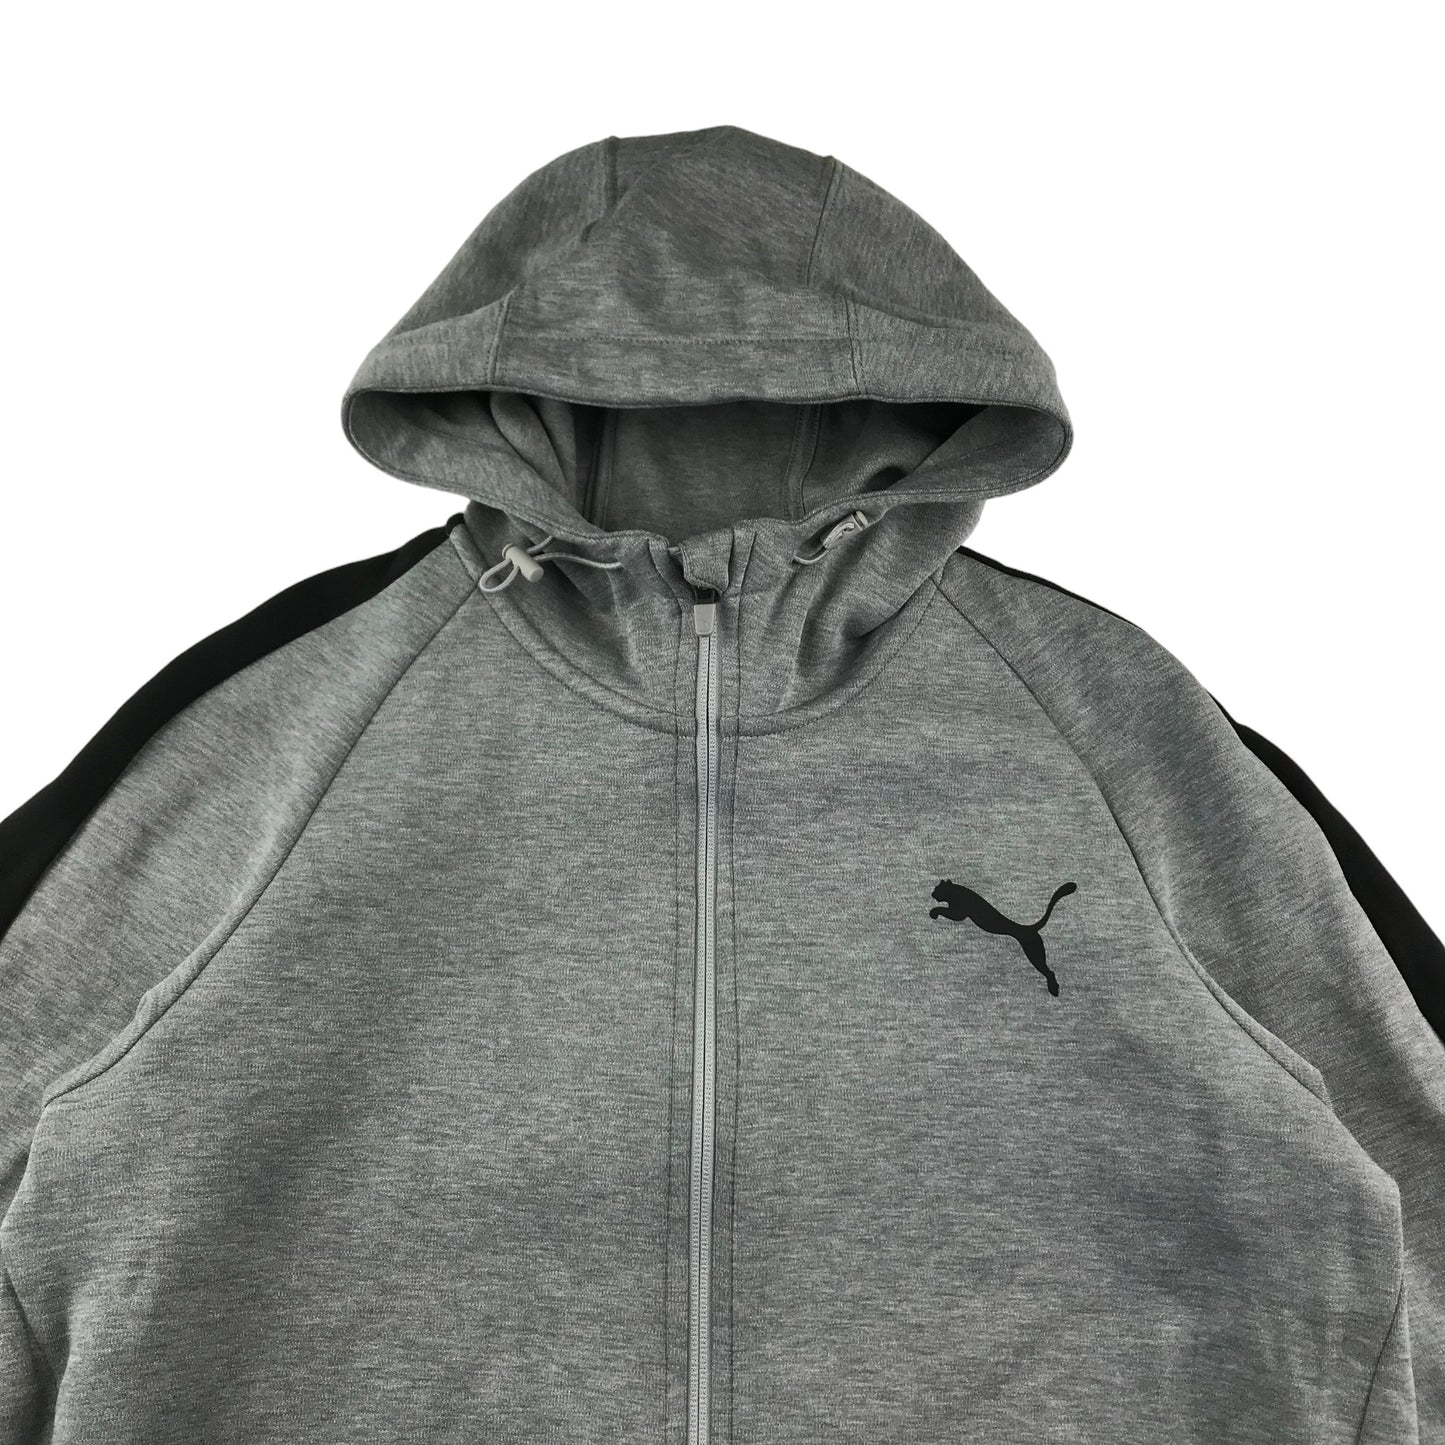 Puma Hoodie Size Large Grey Full Zipper Panelled Arms